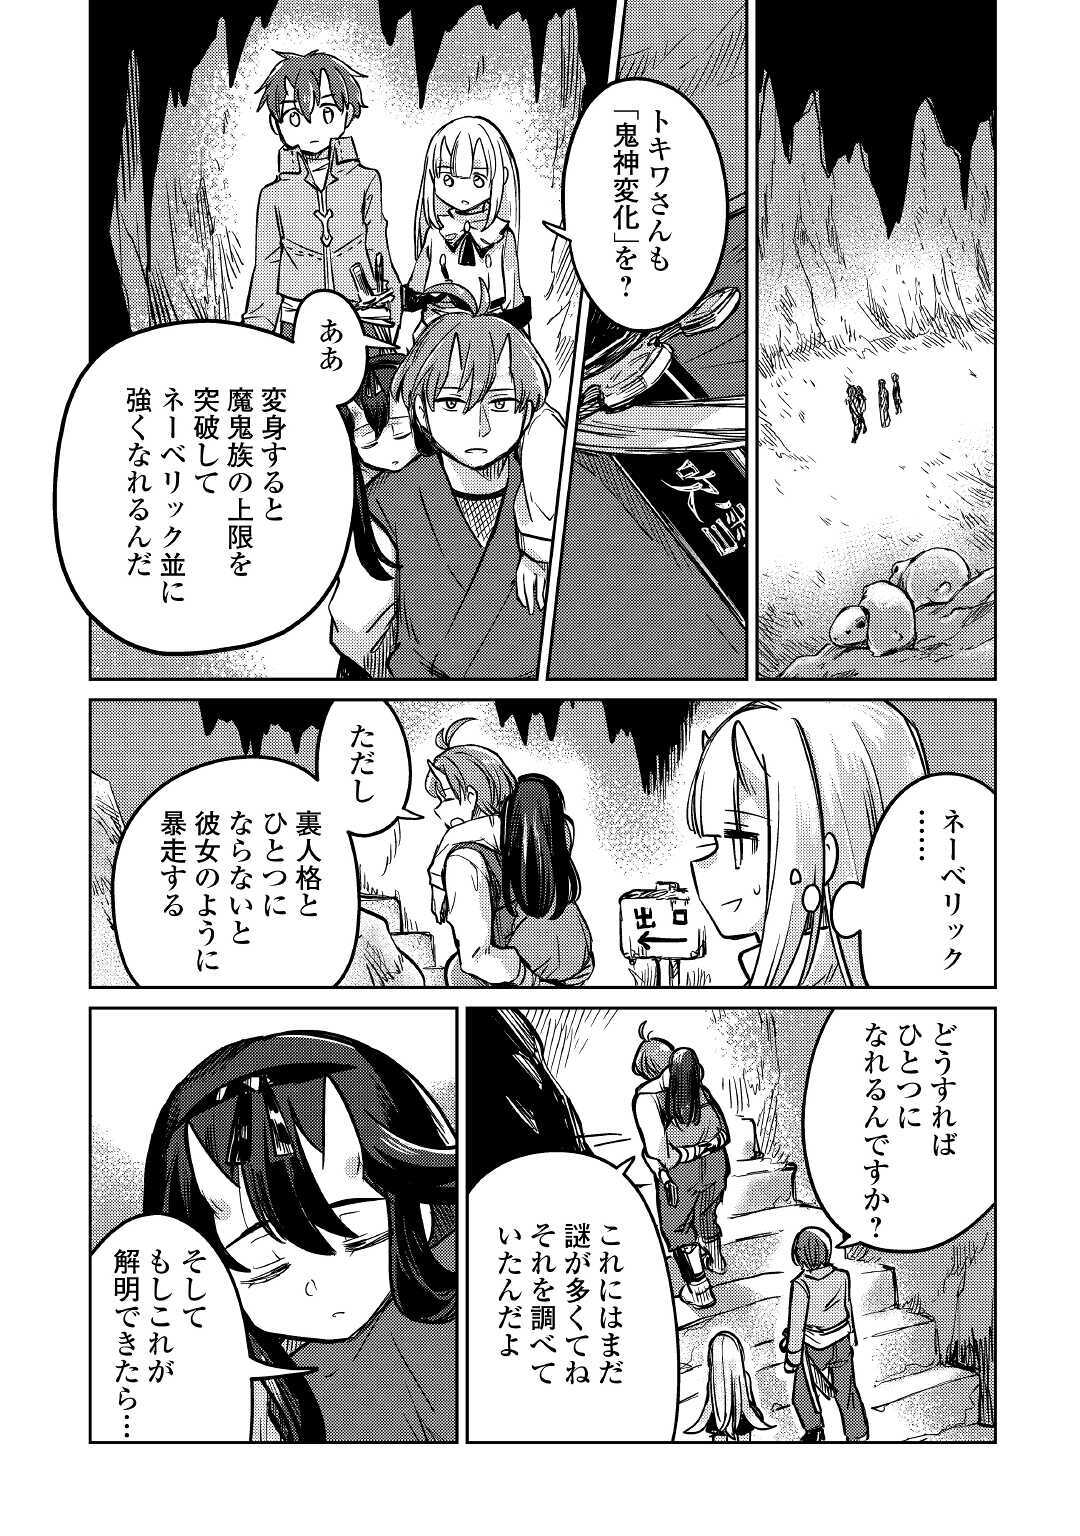 The Former Structural Researcher’s Story of Otherworldly Adventure 第31話 - Page 17